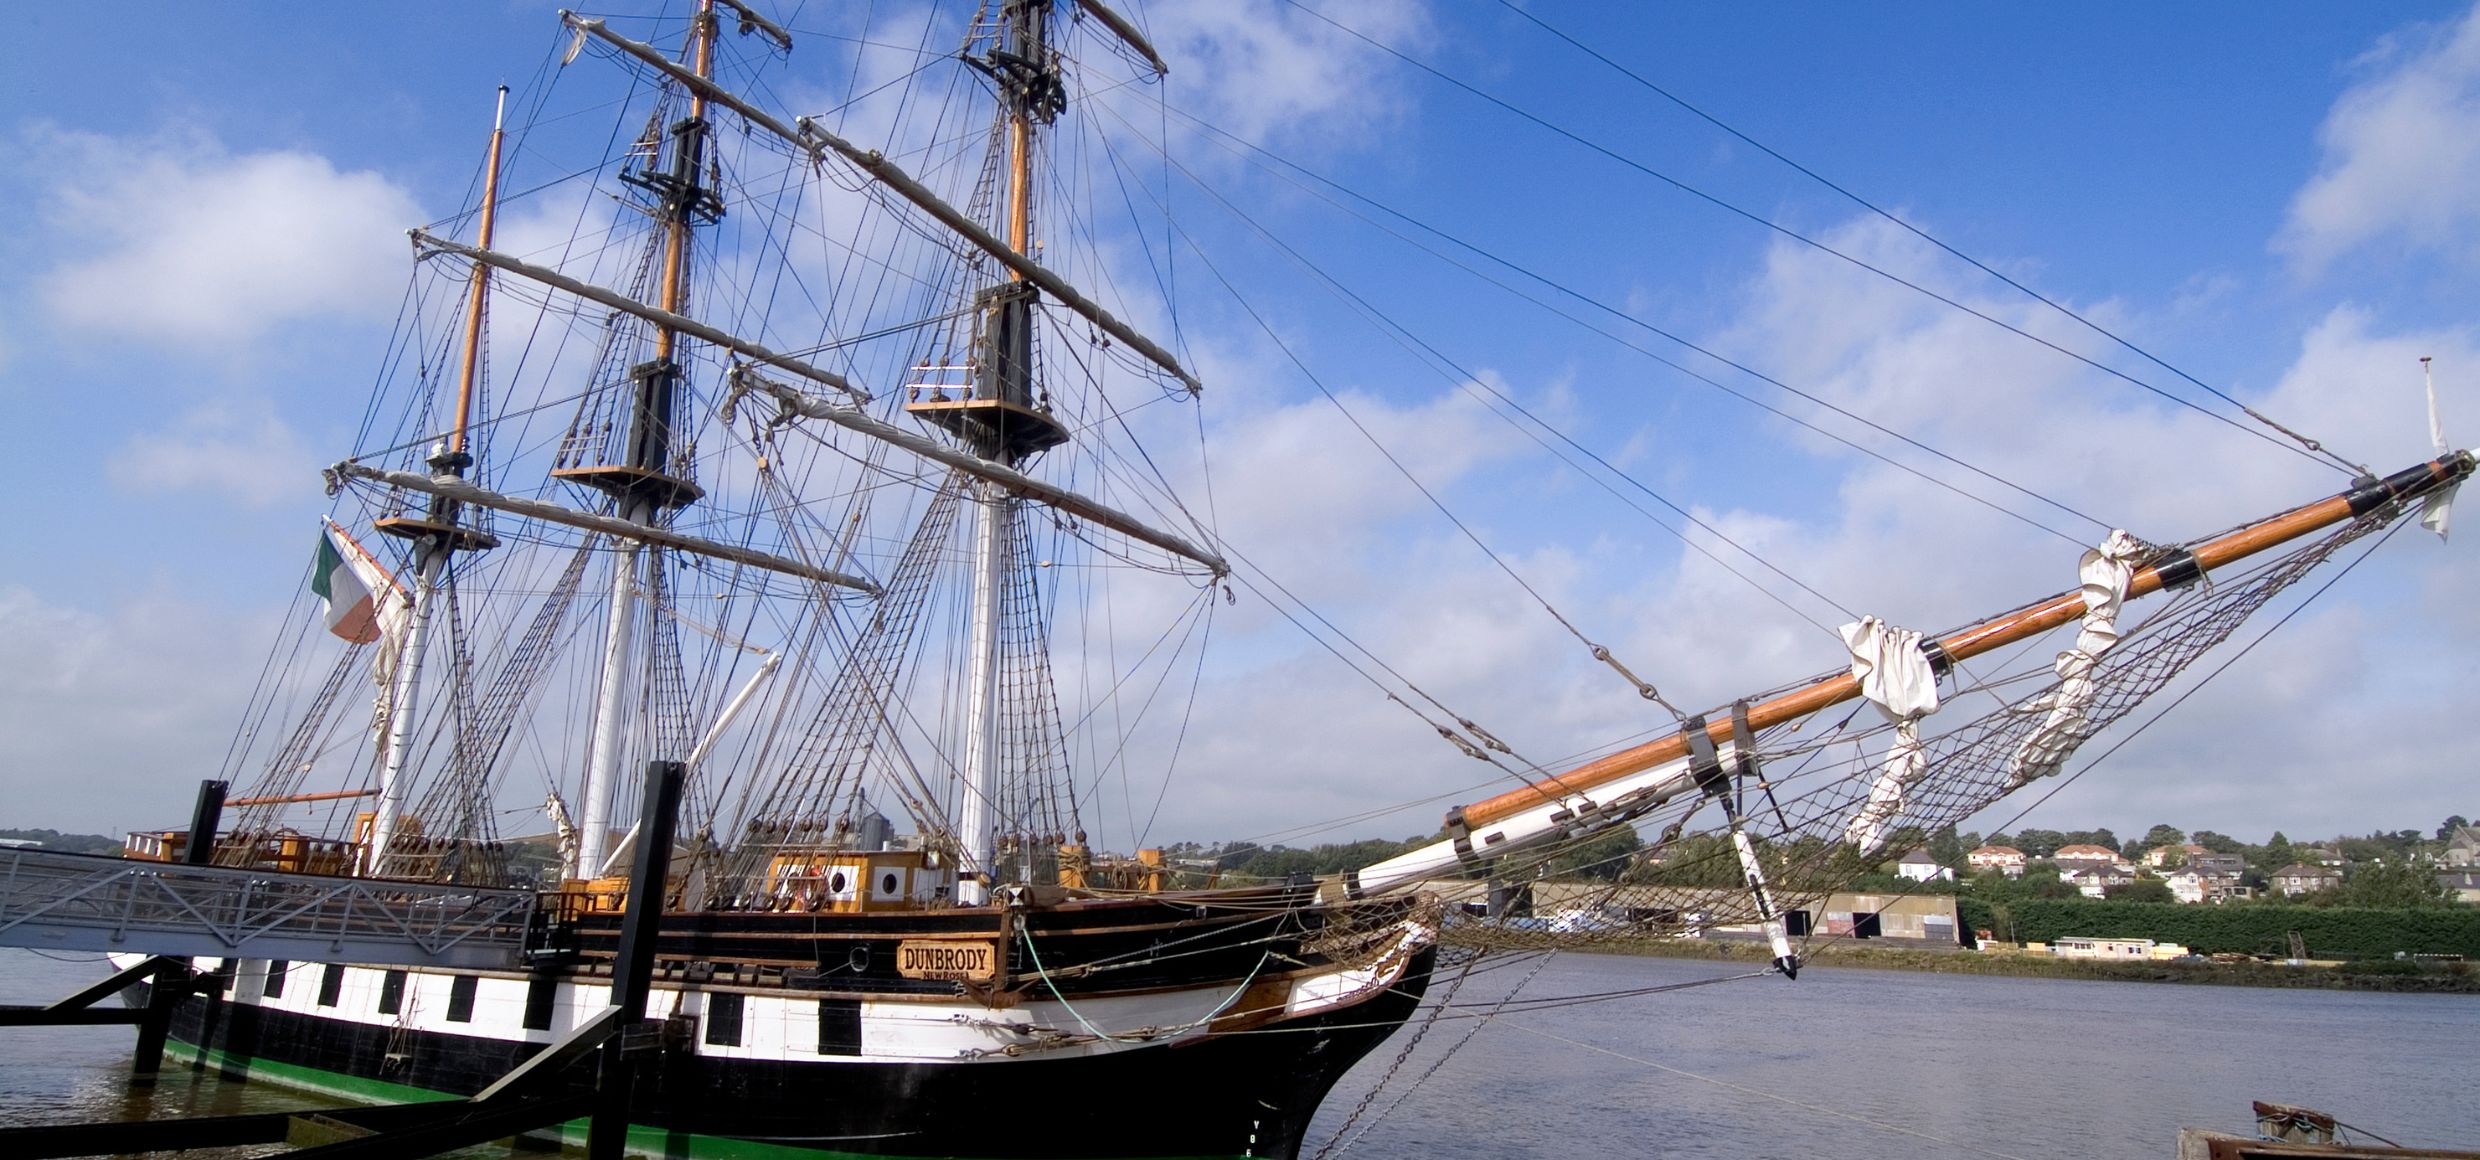 dunbrody-famine-ship-co-wexford_master